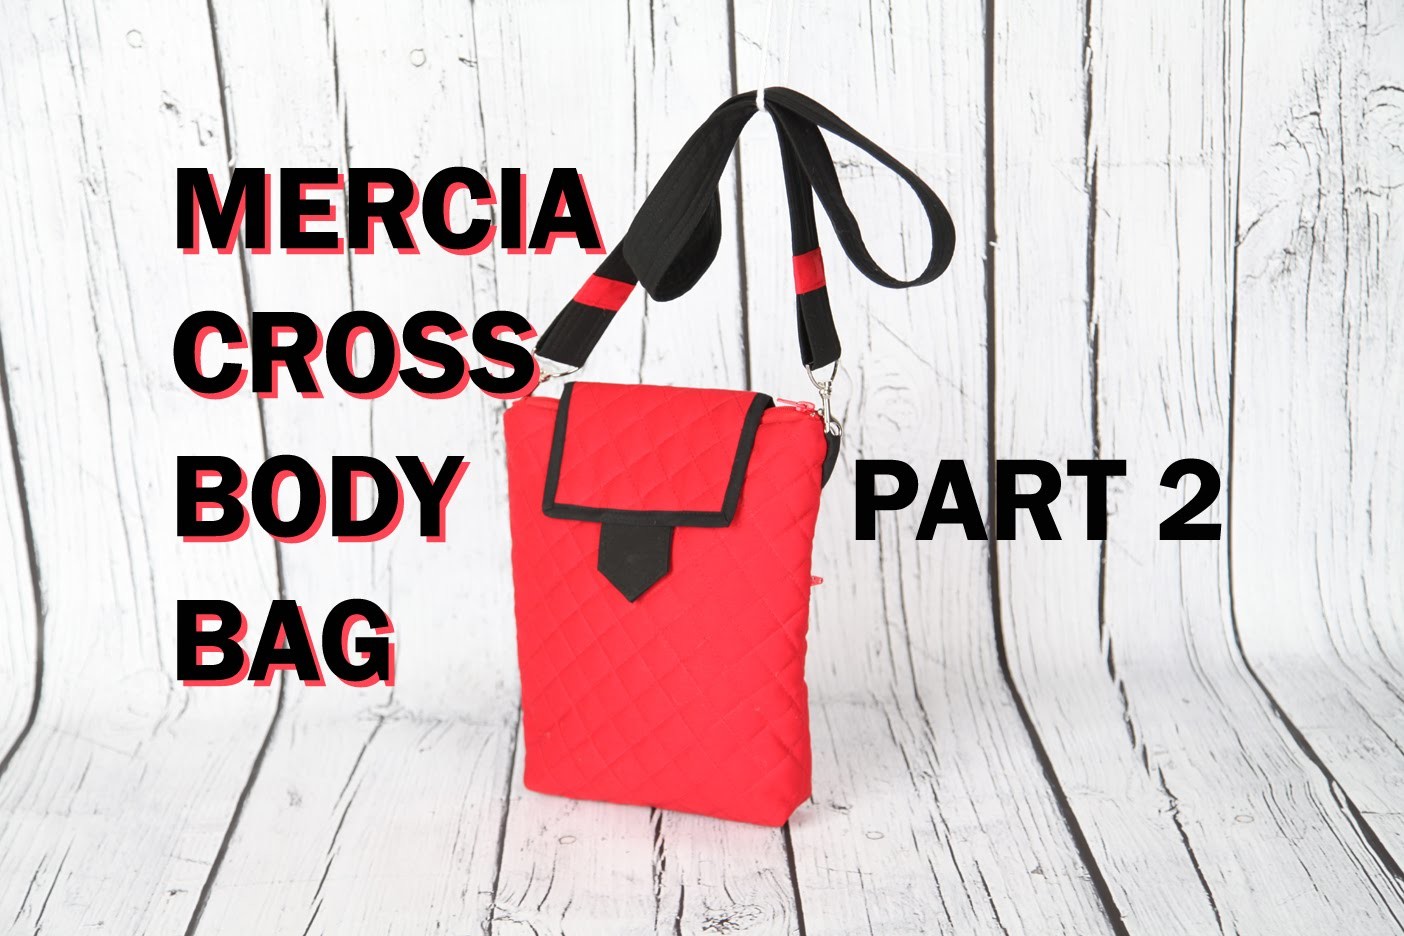 Mercia cross body messenger bag. quilted with pockets. DIY bag VOL 28b